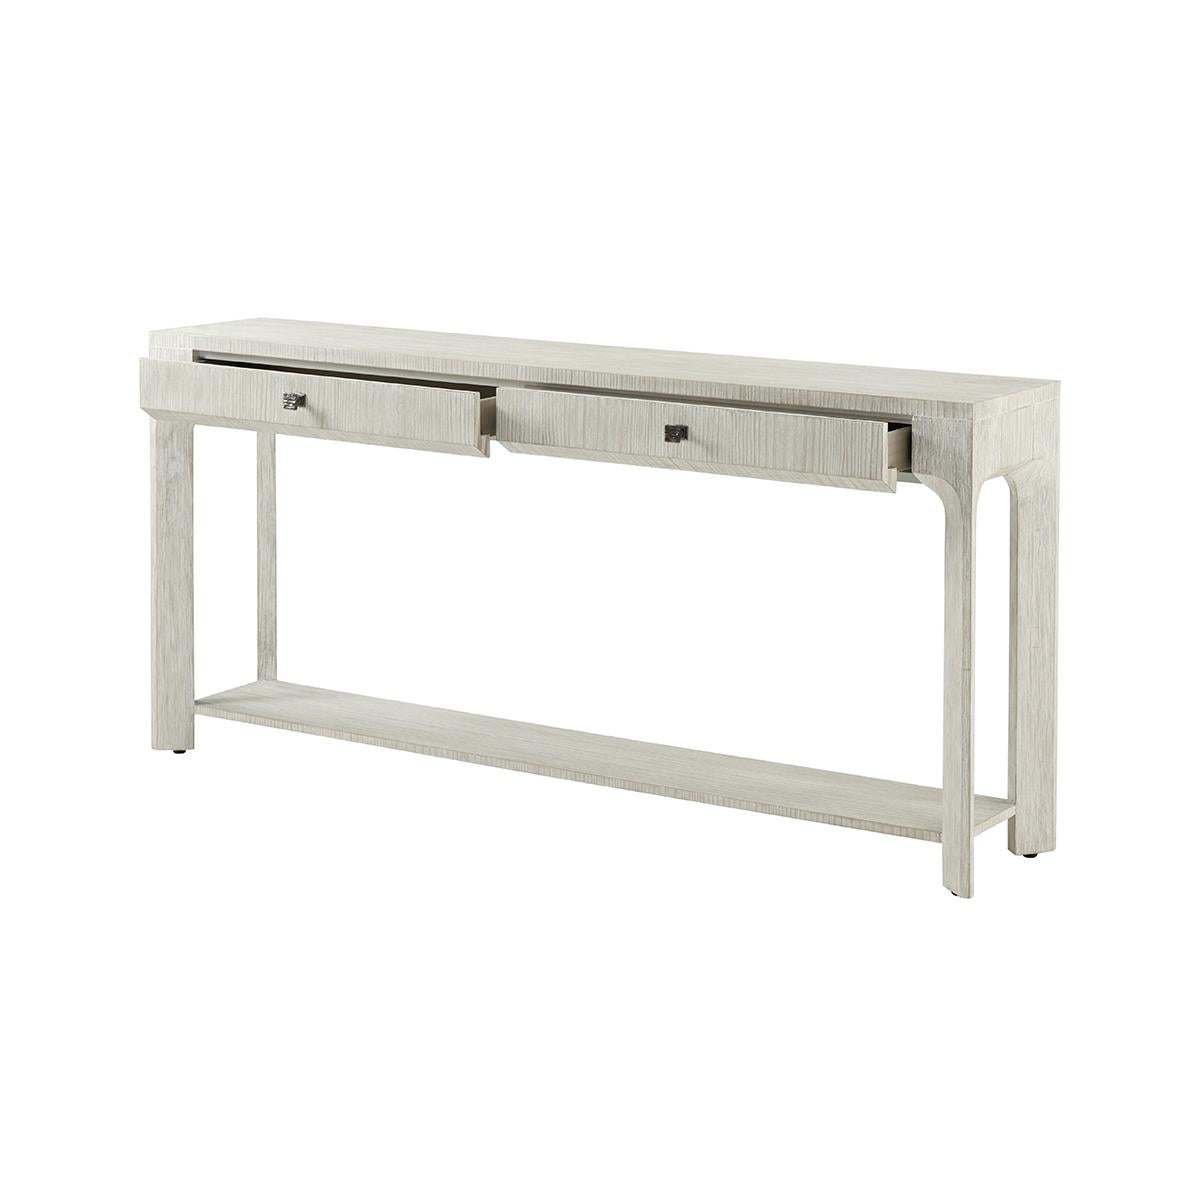 Console Table is crafted from wire-brushed cerused pine and coated in our Sea Salt finish. With a beveled-shaped cross section, dual drawers, and a lower display shelf.

Dimensions: 72